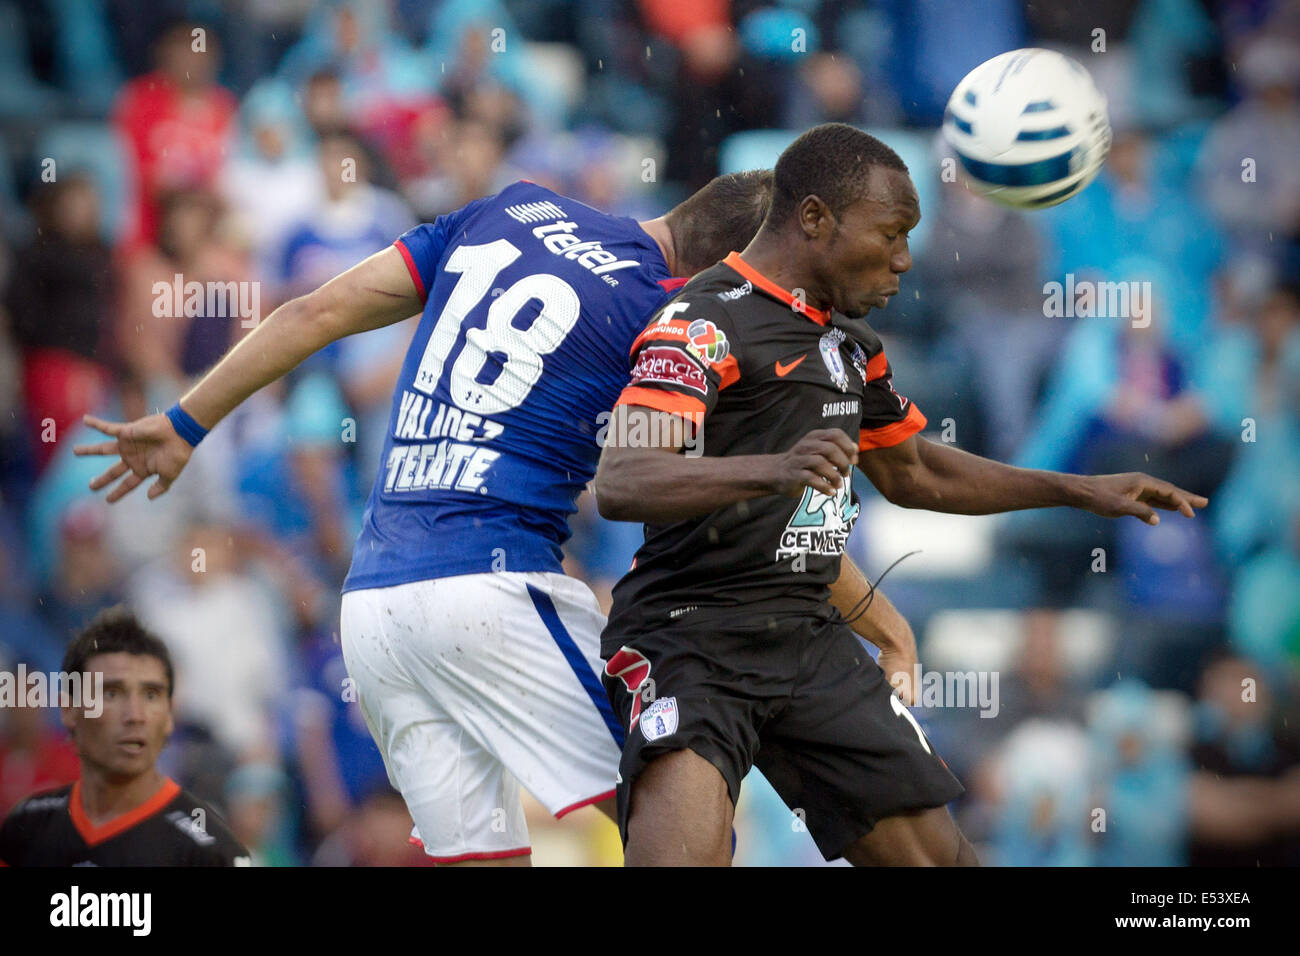 Mexico City, Mexico. 19th July, 2014. Cruz Azul's Ismael Valadez (L) vies for the ball with Walter Ayovi of Pachuca during the match of the MX League Opening Tournament held at Azul Stadium in Mexico City, capital of Mexico, on July 19, 2014. Credit:  Alejandro Ayala/Xinhua/Alamy Live News Stock Photo